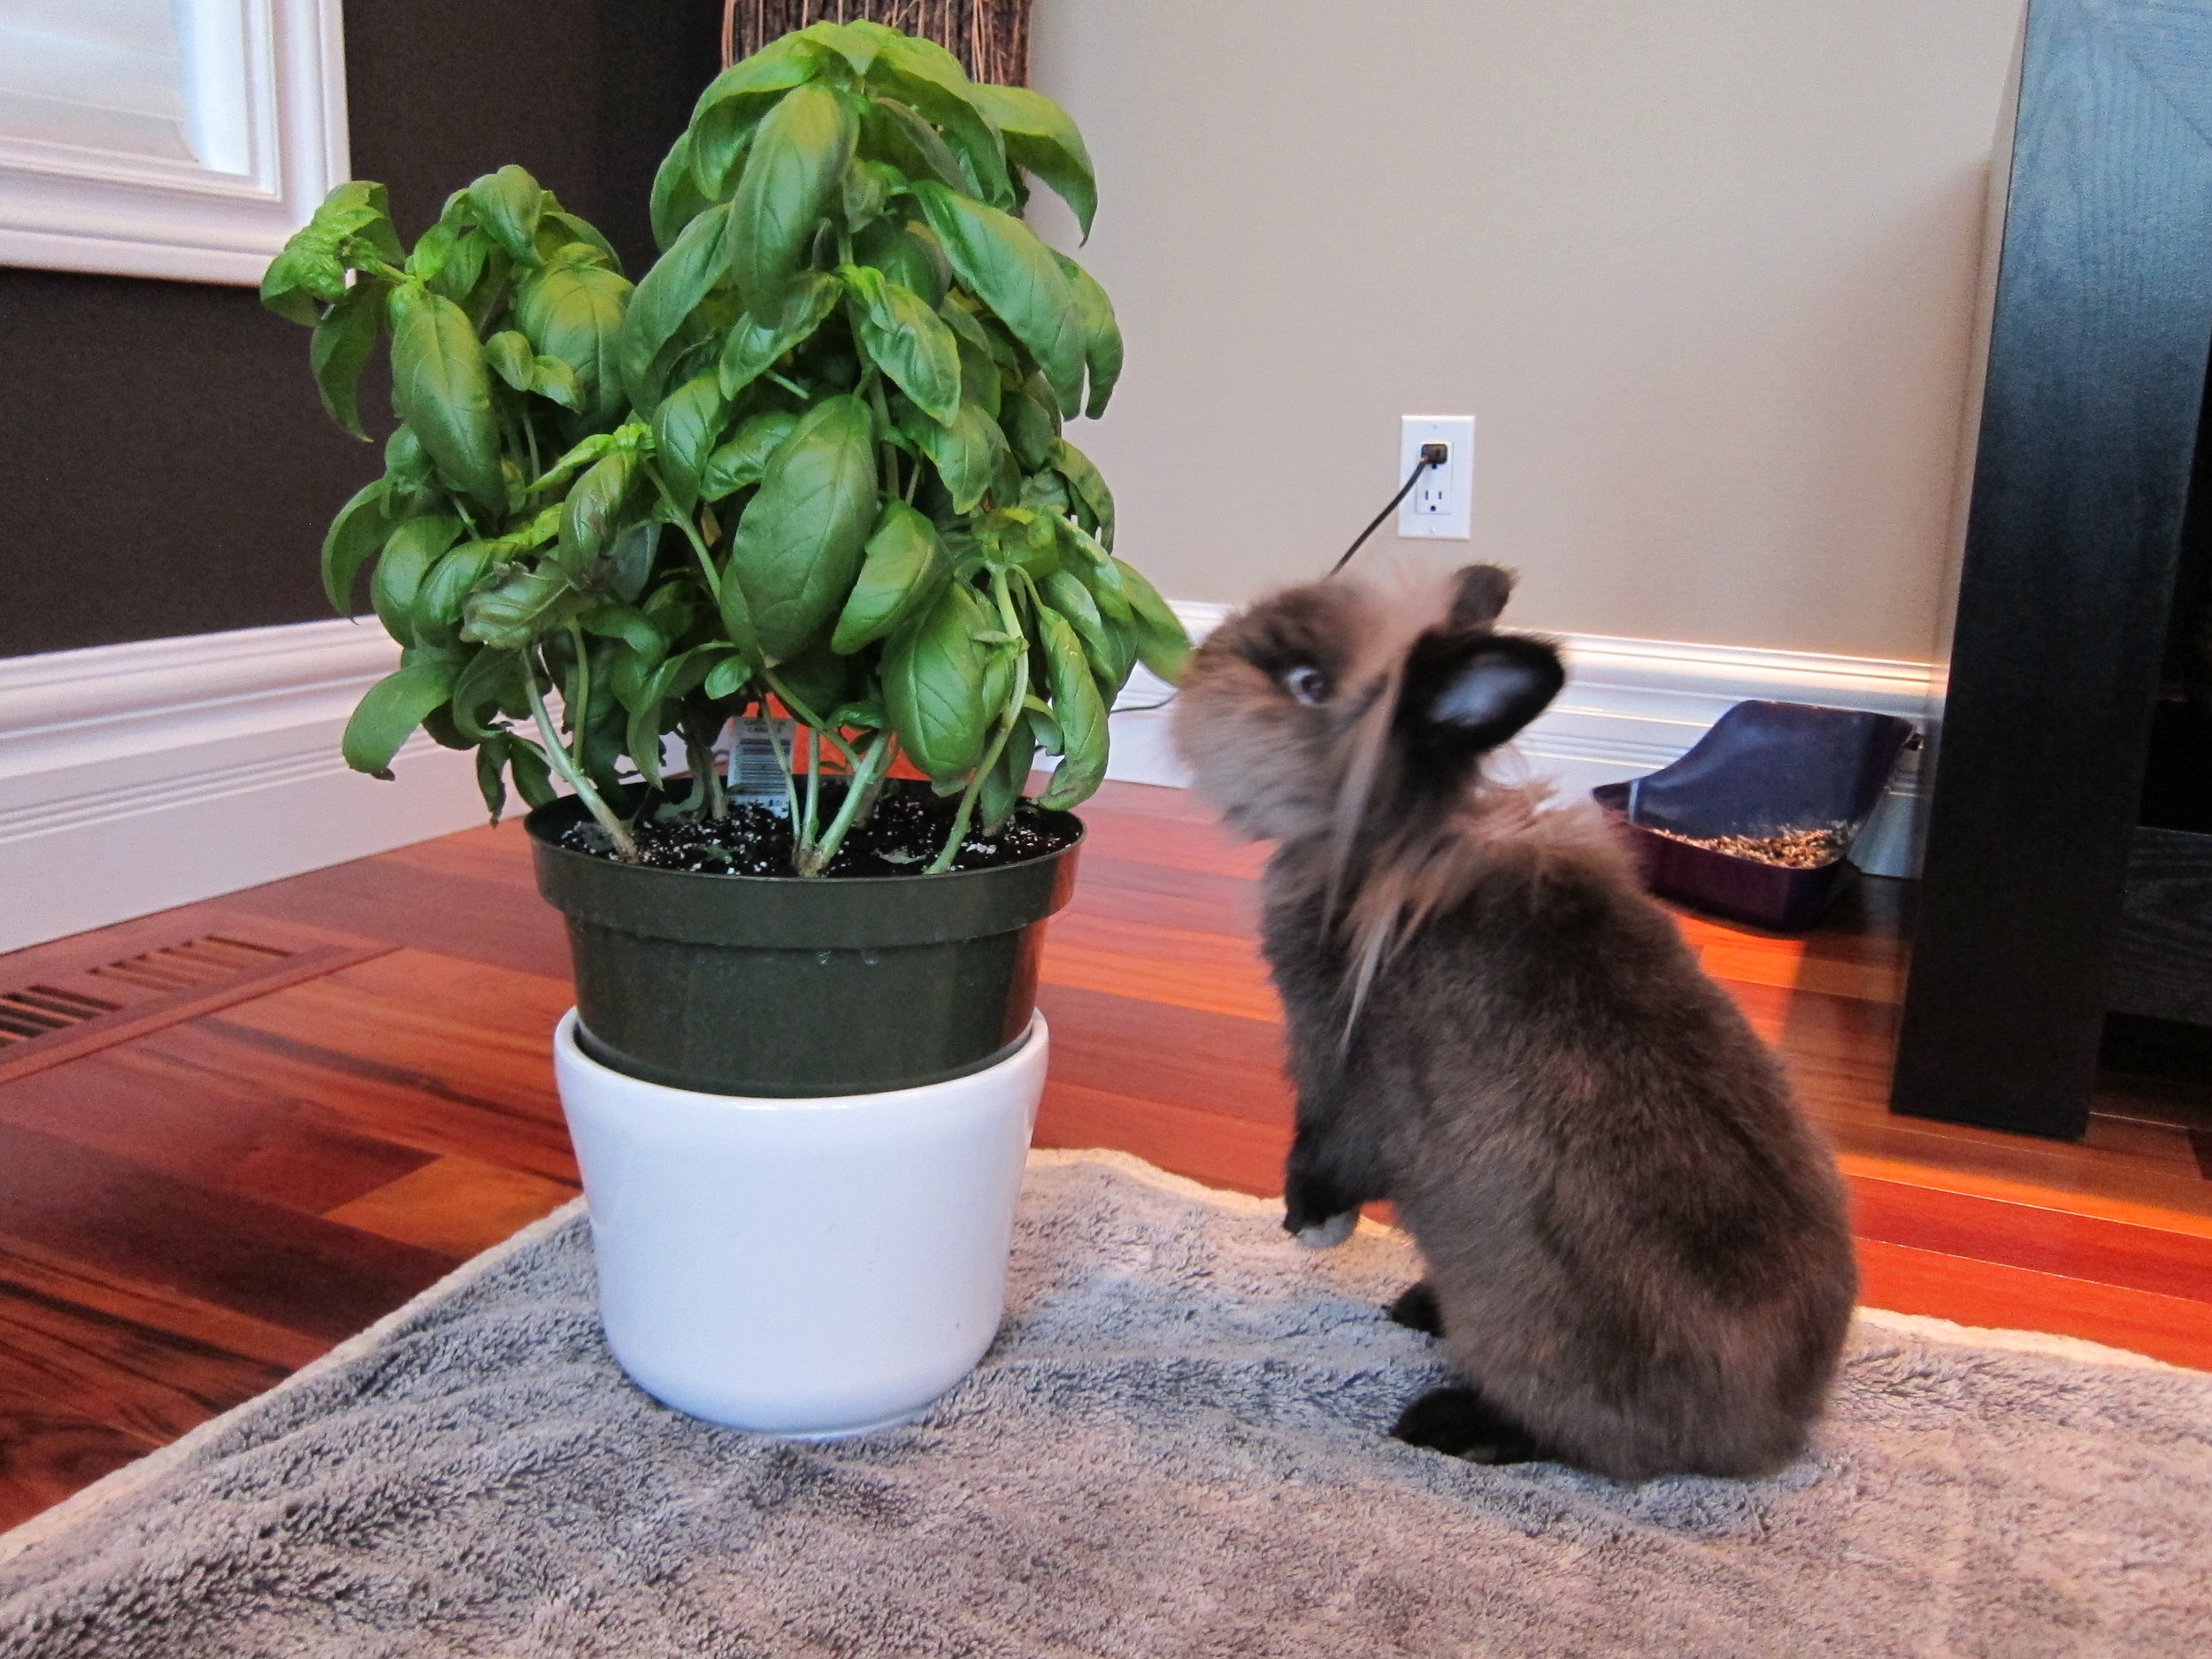 Bunny Helps Himself to the Basil Plant 2